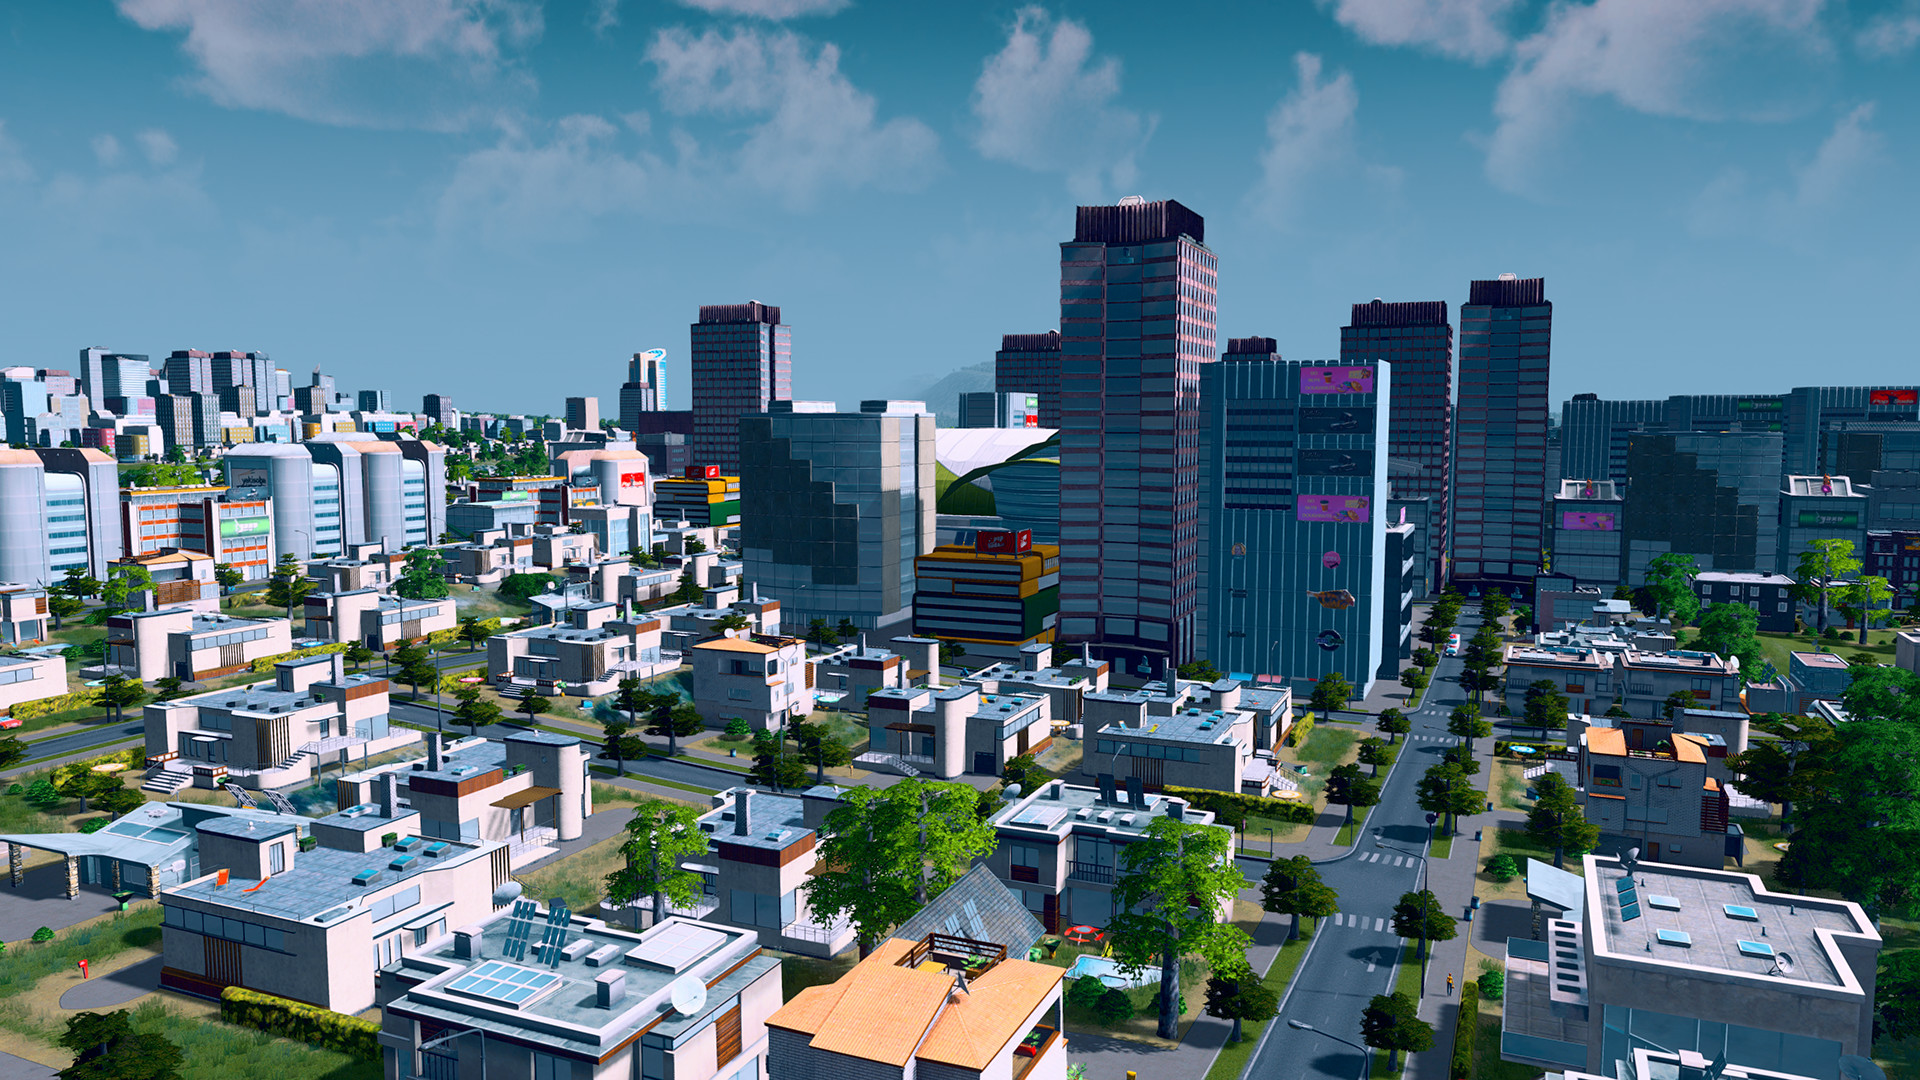 cities skylines deluxe edition dlc repack